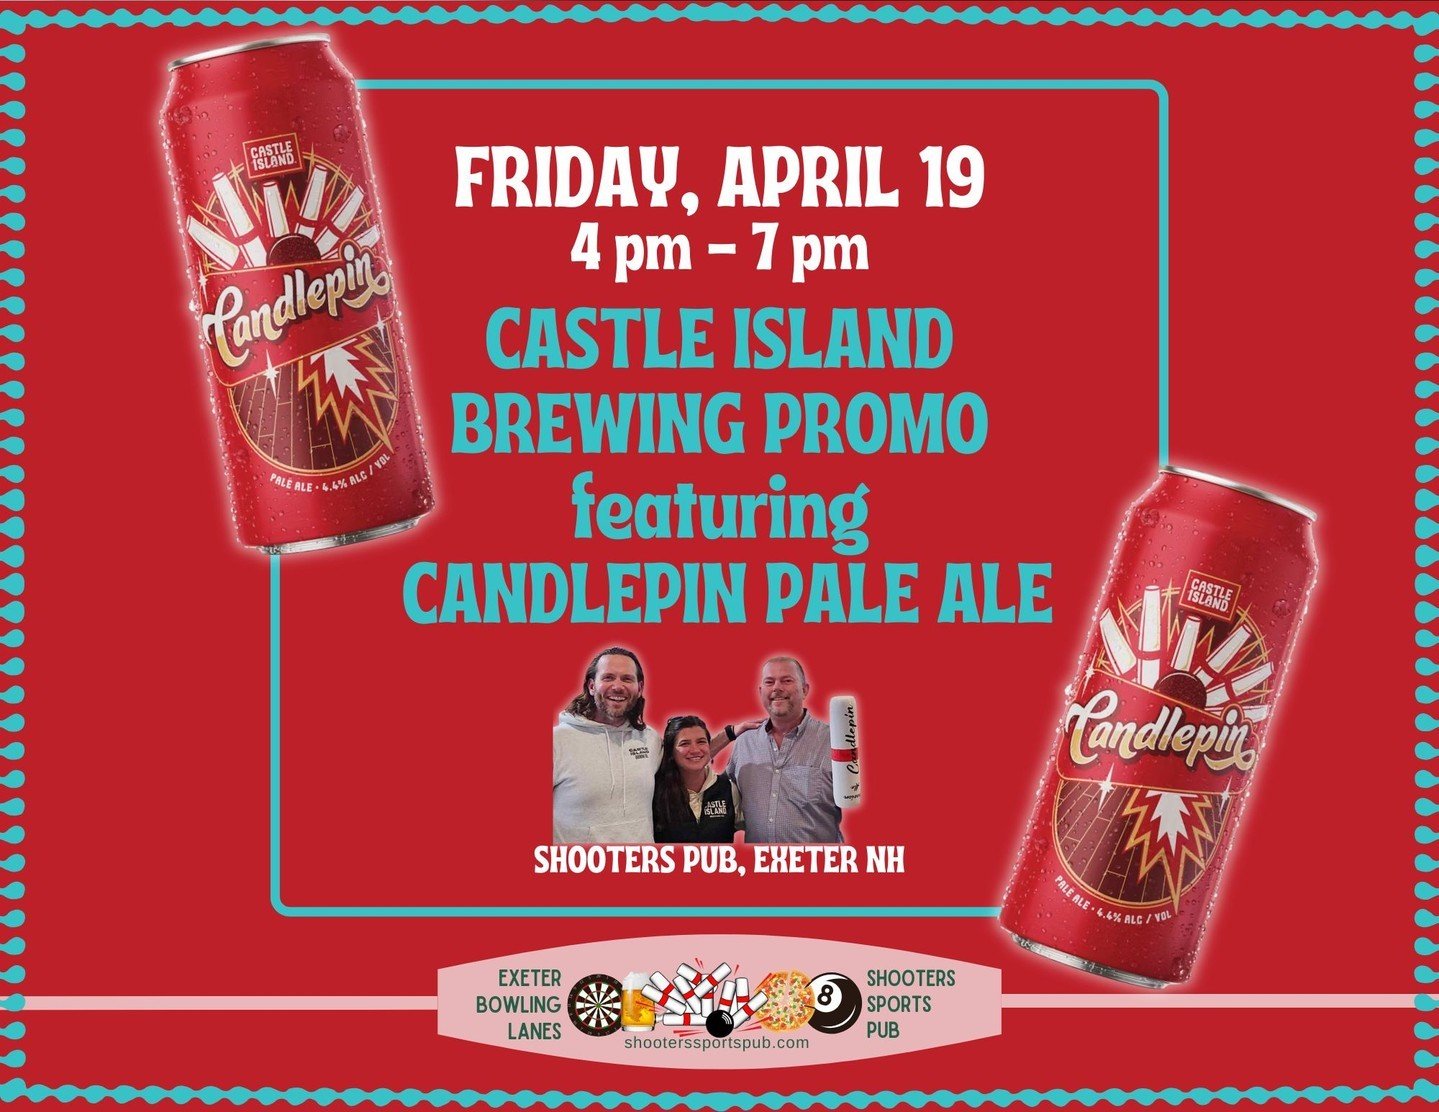 🍺 Join us this Friday, the 19th, from 4 to 7 p.m. for the ultimate Castle Island Brewing promo, with Todd Hearon performing from 6 to 9 p.m. ⁠
⁠
Castle Island says, &quot;Candlepin is an anytime...scratch that, everytime beer.&quot; Come for the bre